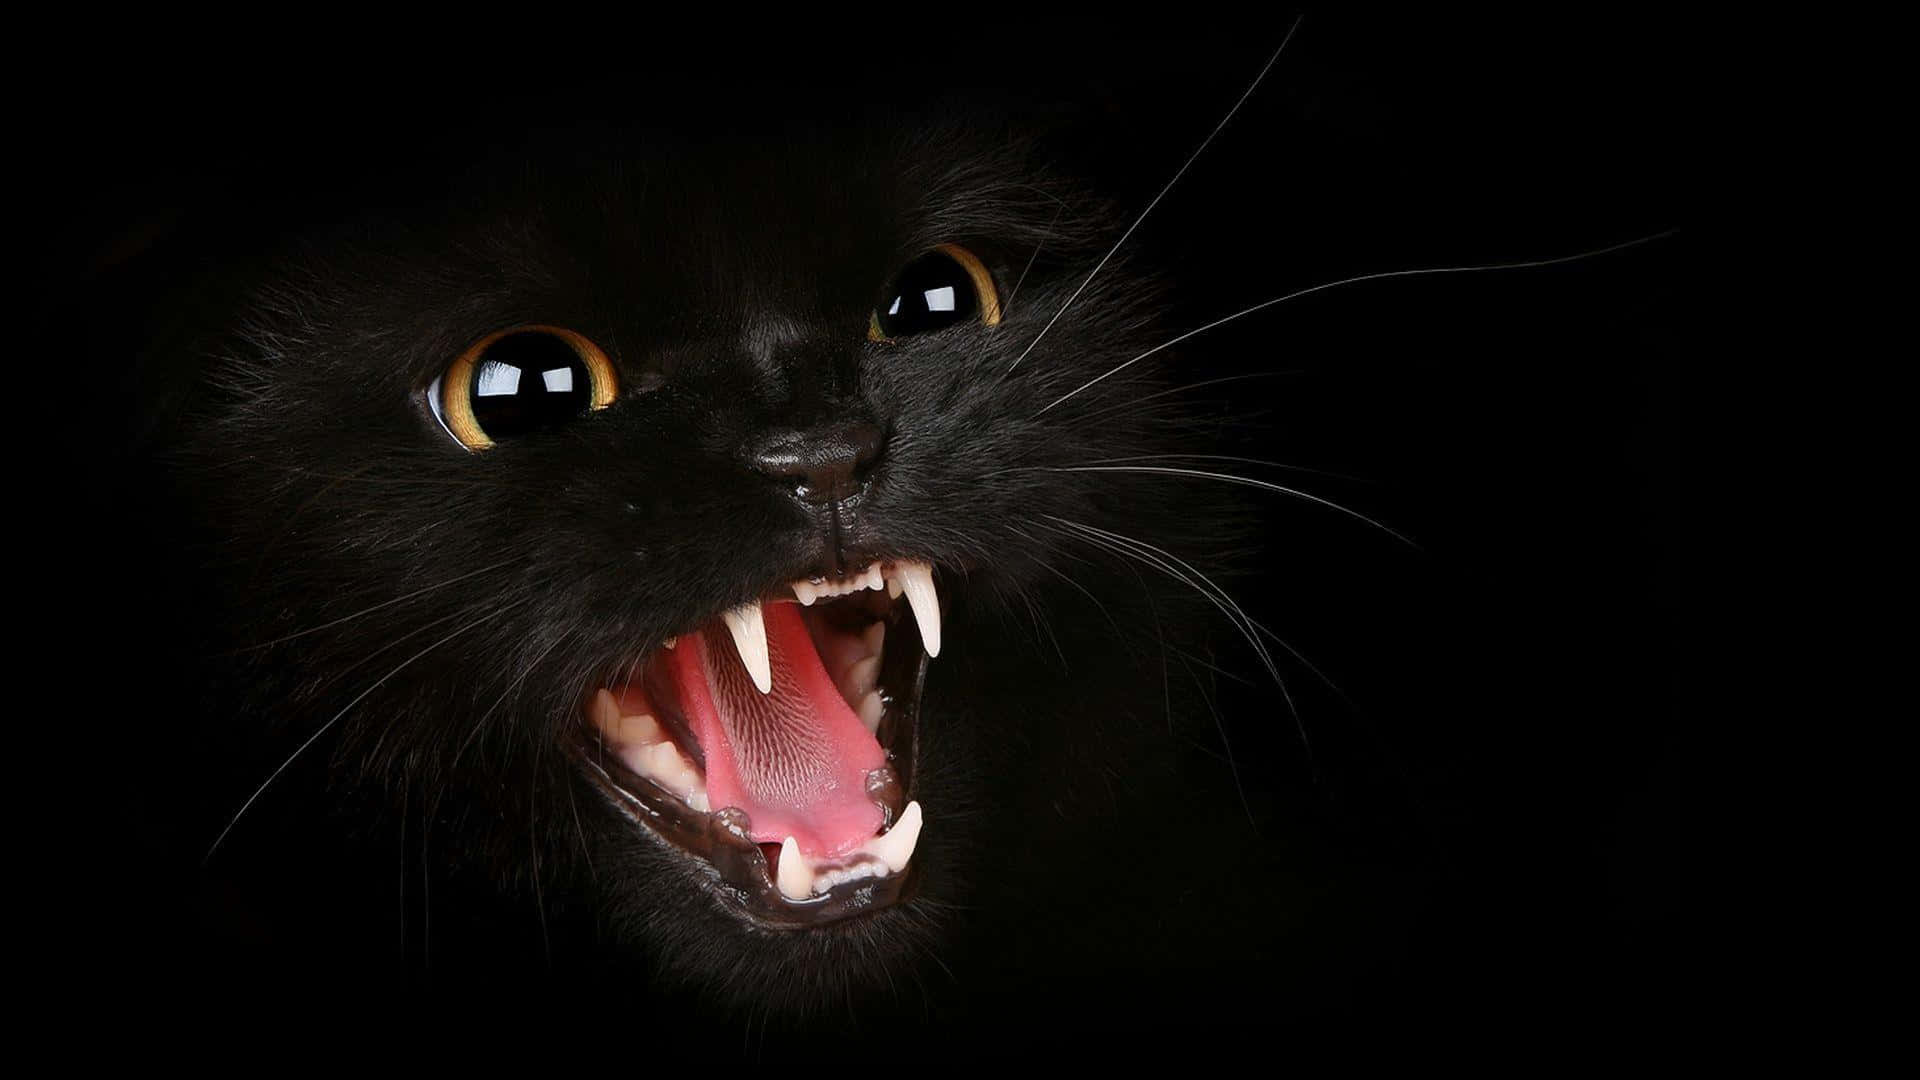 A Black Cat With Its Mouth Open On A Black Background Wallpaper